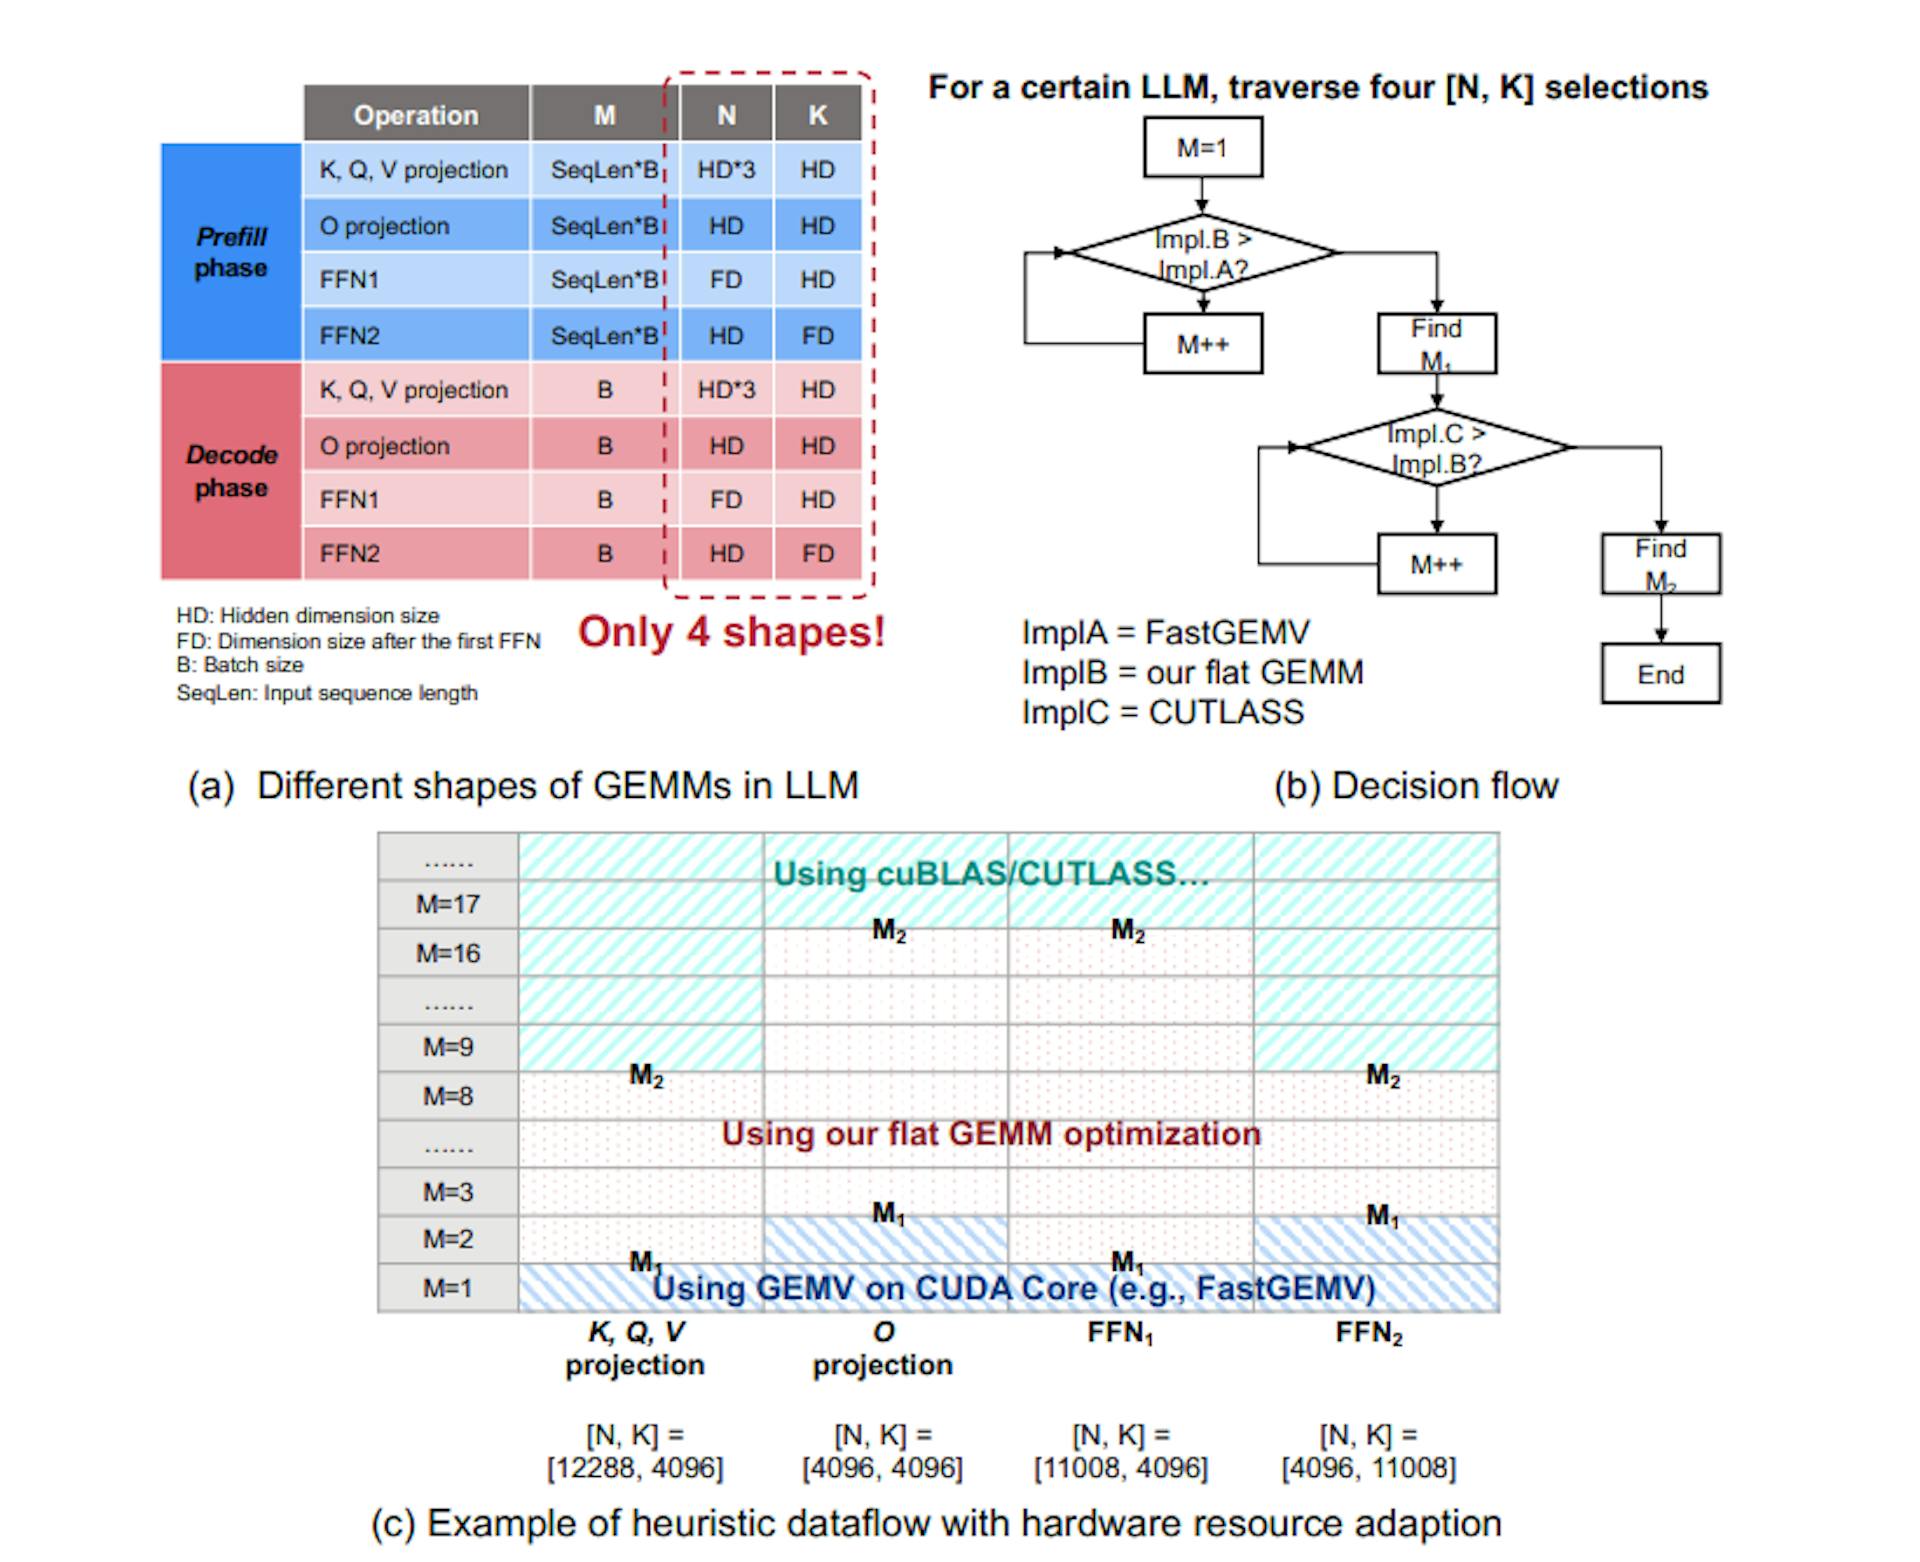 Figure 9: Heuristic dataflow with hardware resource adaption in FlashDecoding++. (a) Only four [N, K] shapesexist for a certain LLM. (b) The decision flow. We traverse all [N, K] selections and profile the performance of three